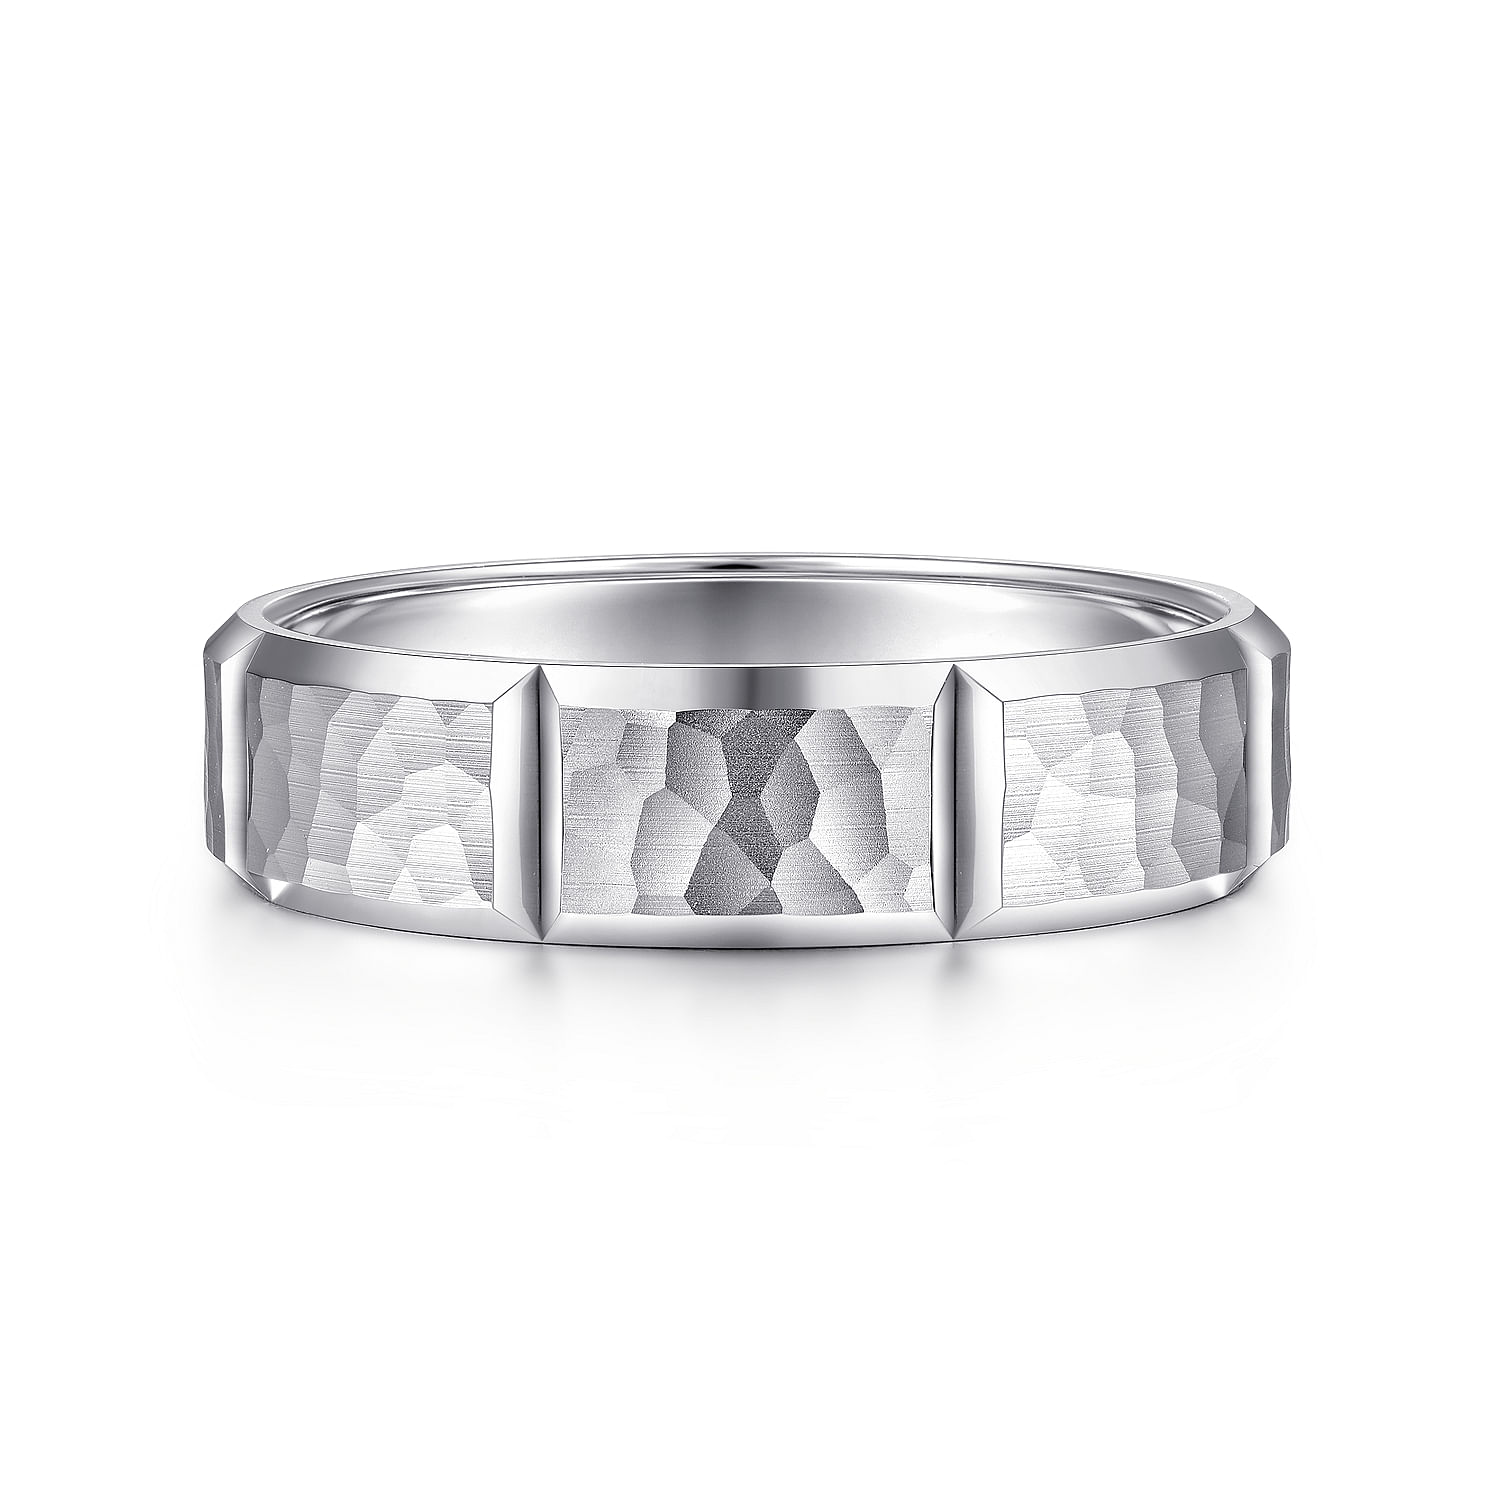 14K White Gold 6mm - Men's Wedding Band with Hammered Stations